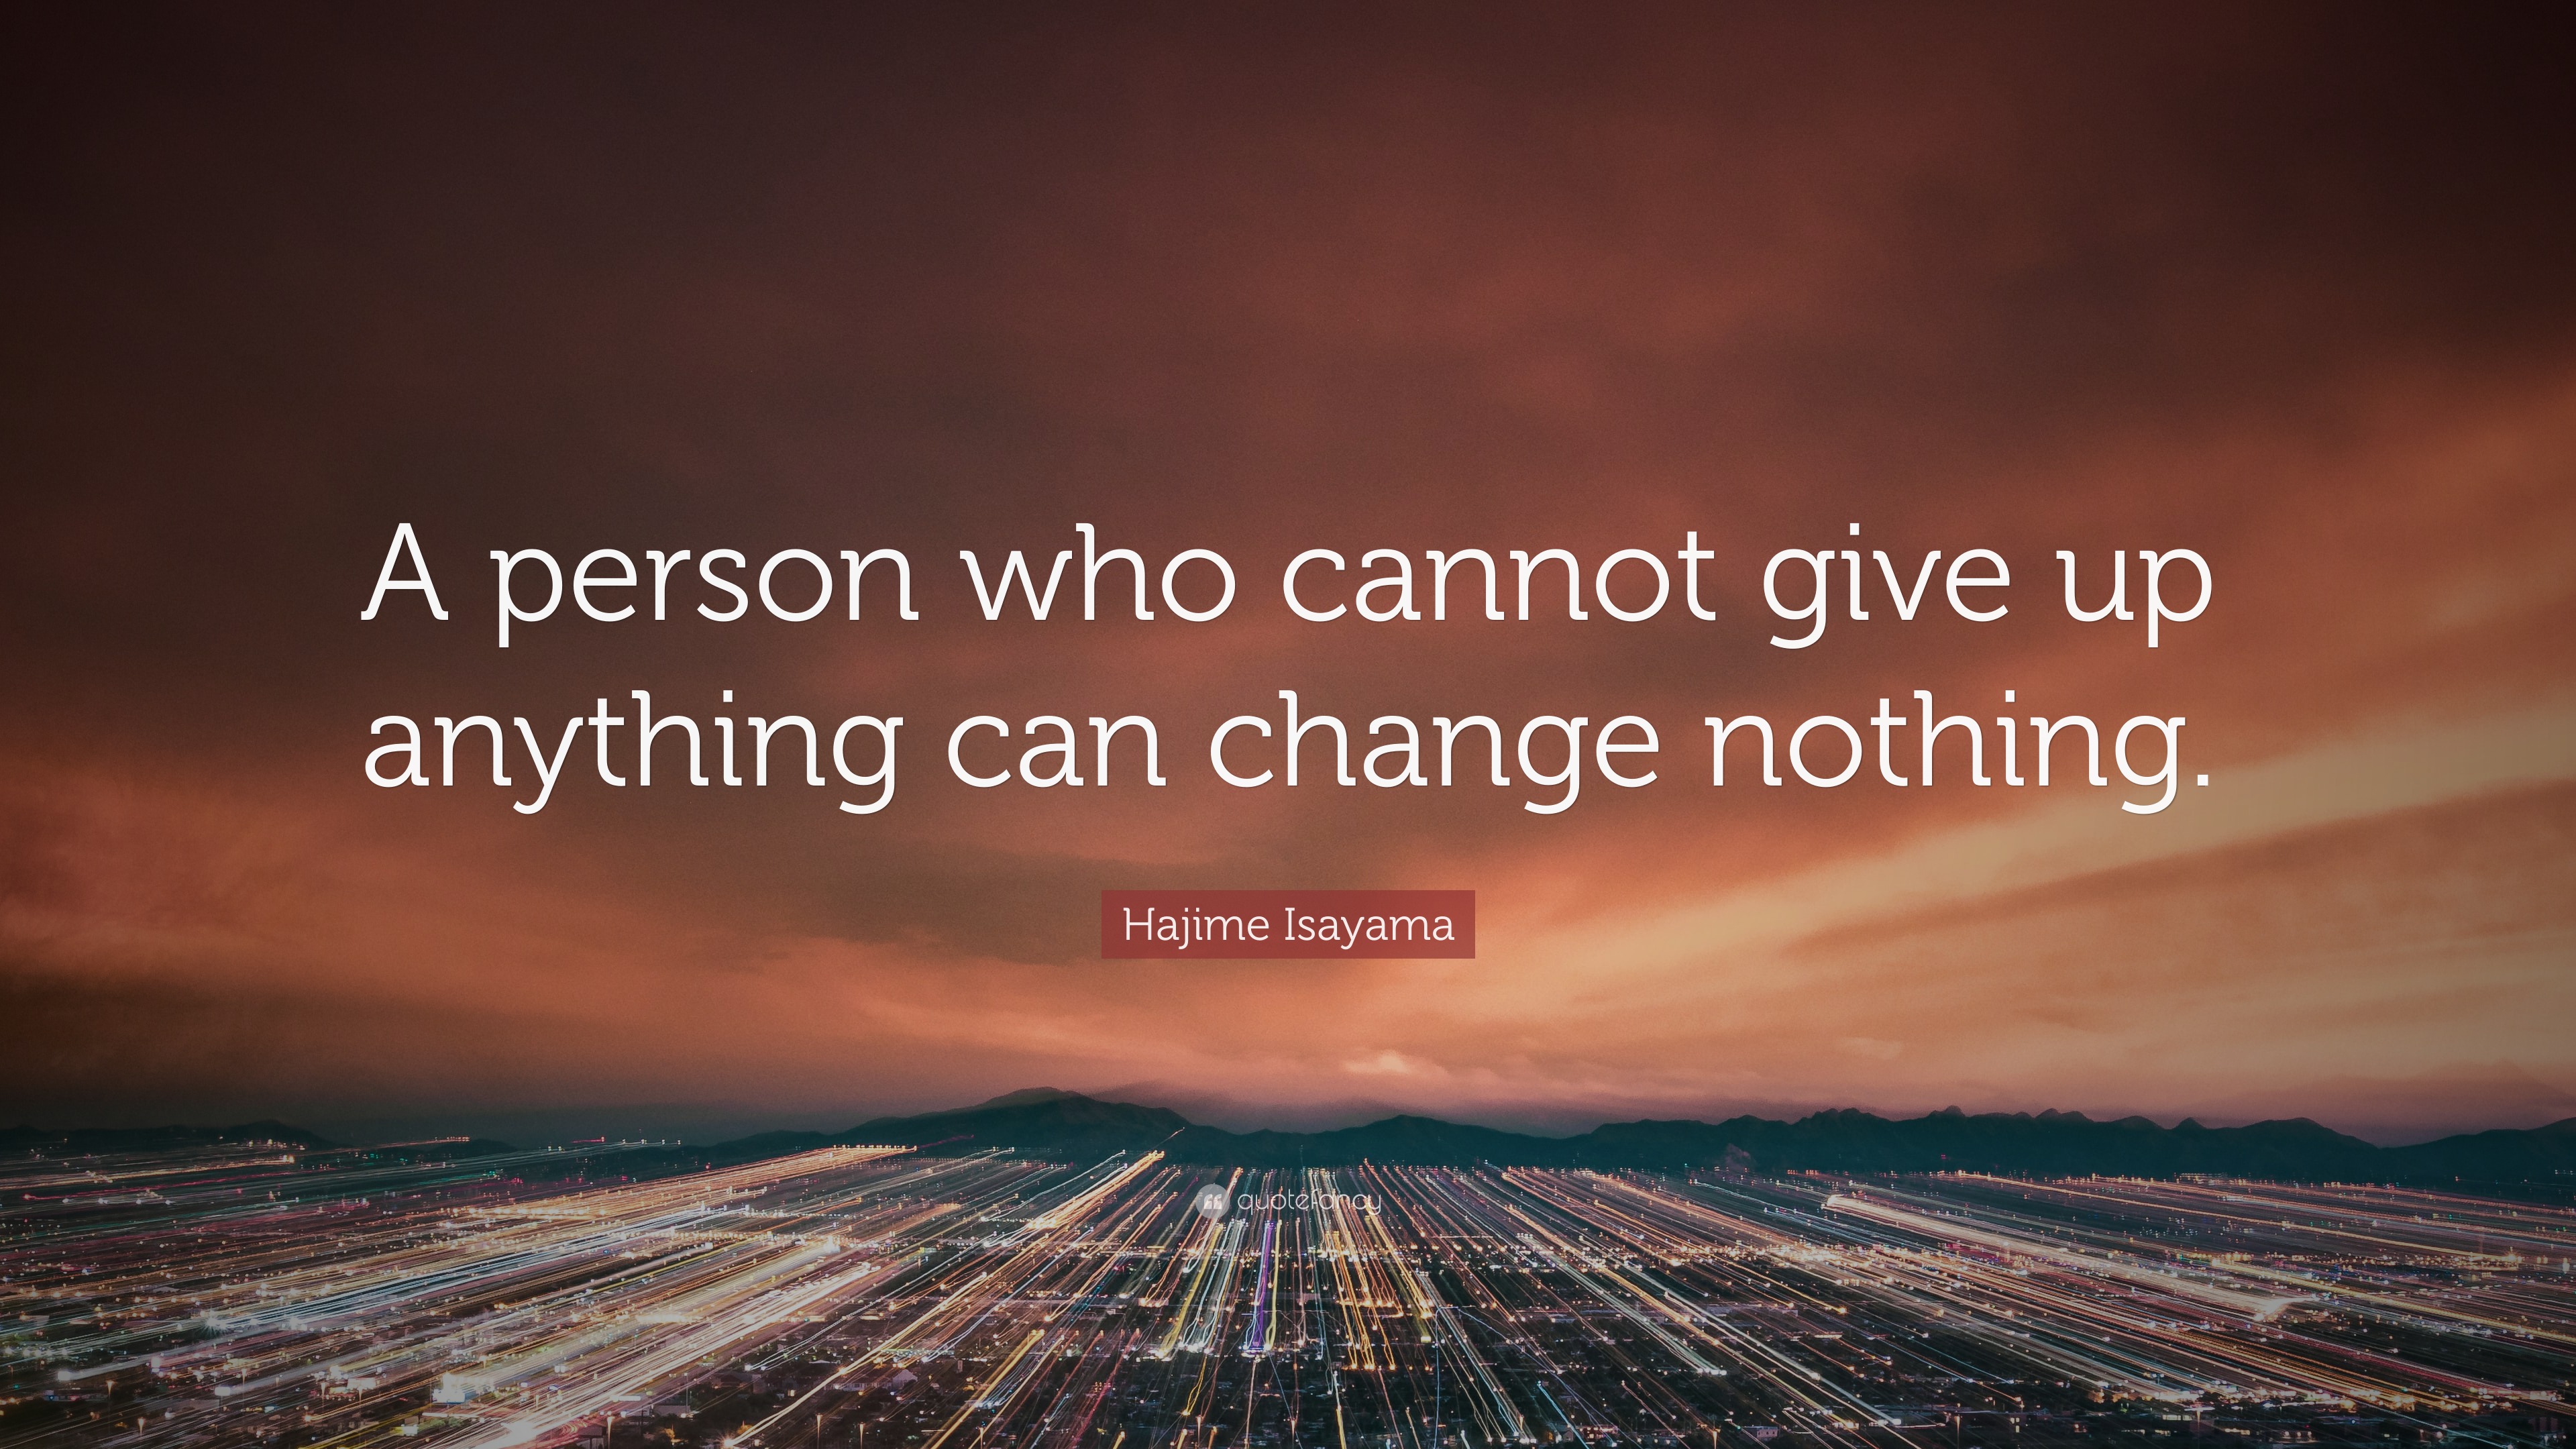 Hajime Isayama Quote: “A person who cannot give up anything can change ...